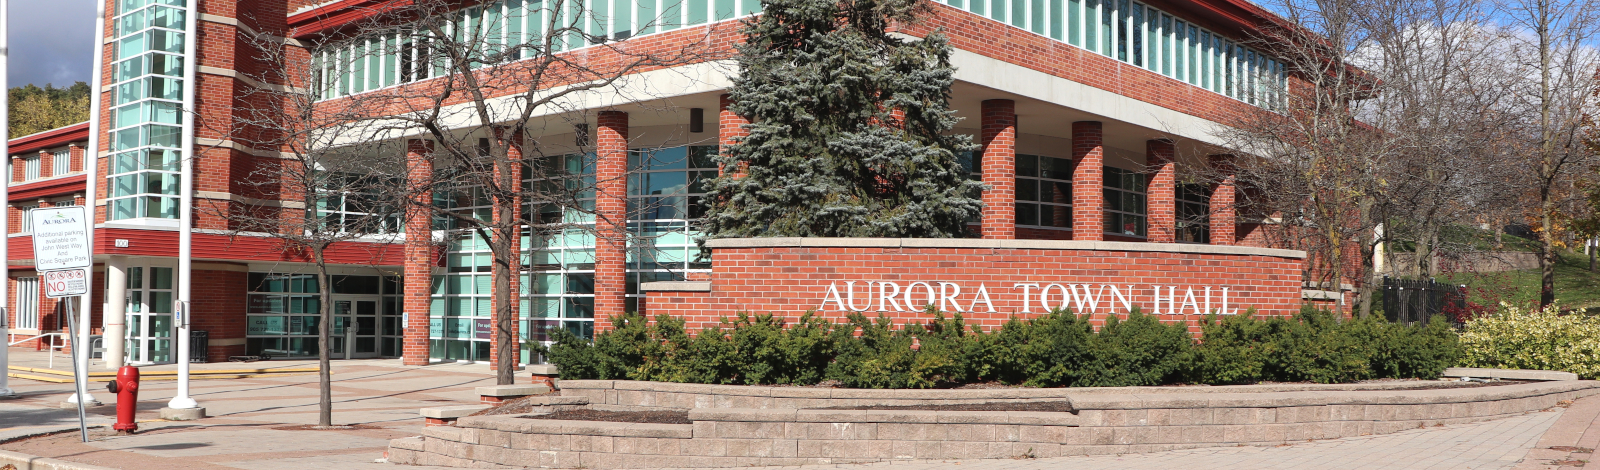 Front of building Aurora Town Hall